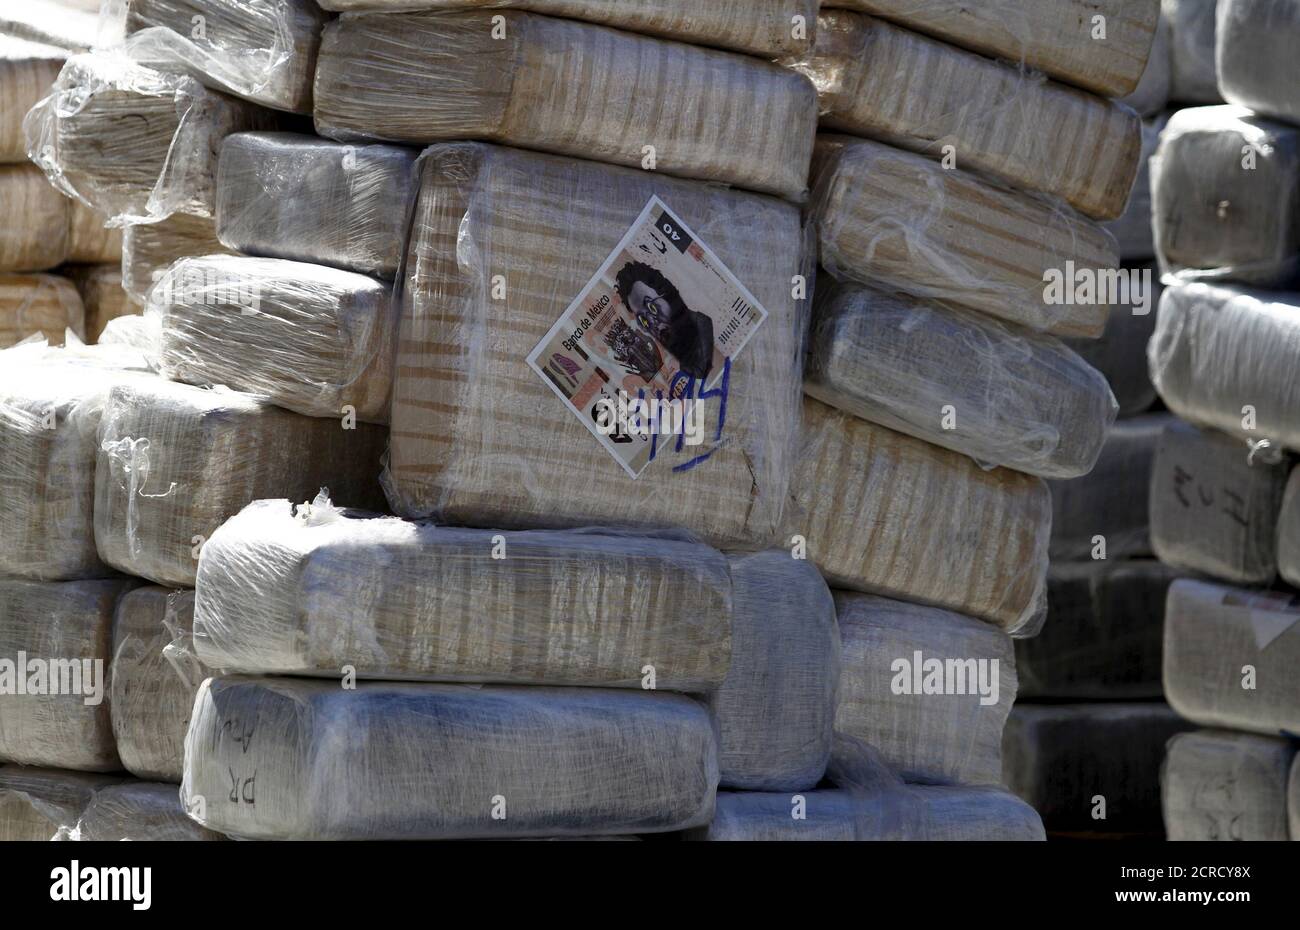 Tijuana Cartel High Resolution Stock Photography and Images - Alamy